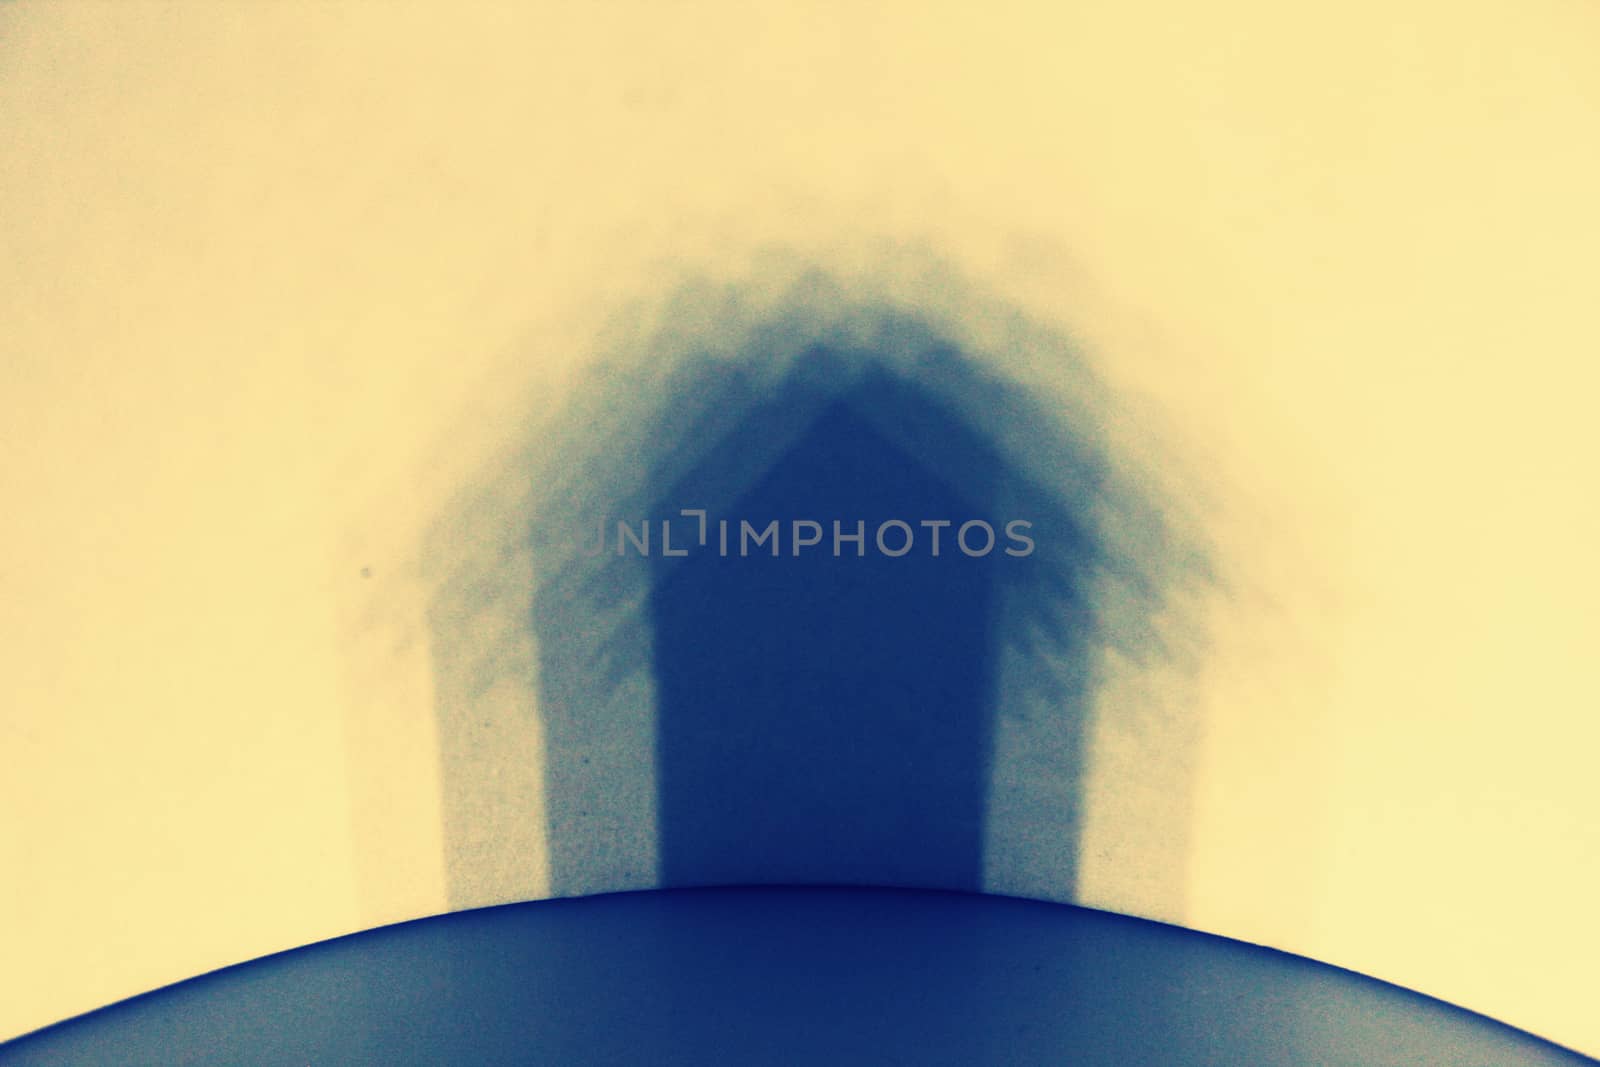 Multiple shadow of Miniature Home on wall